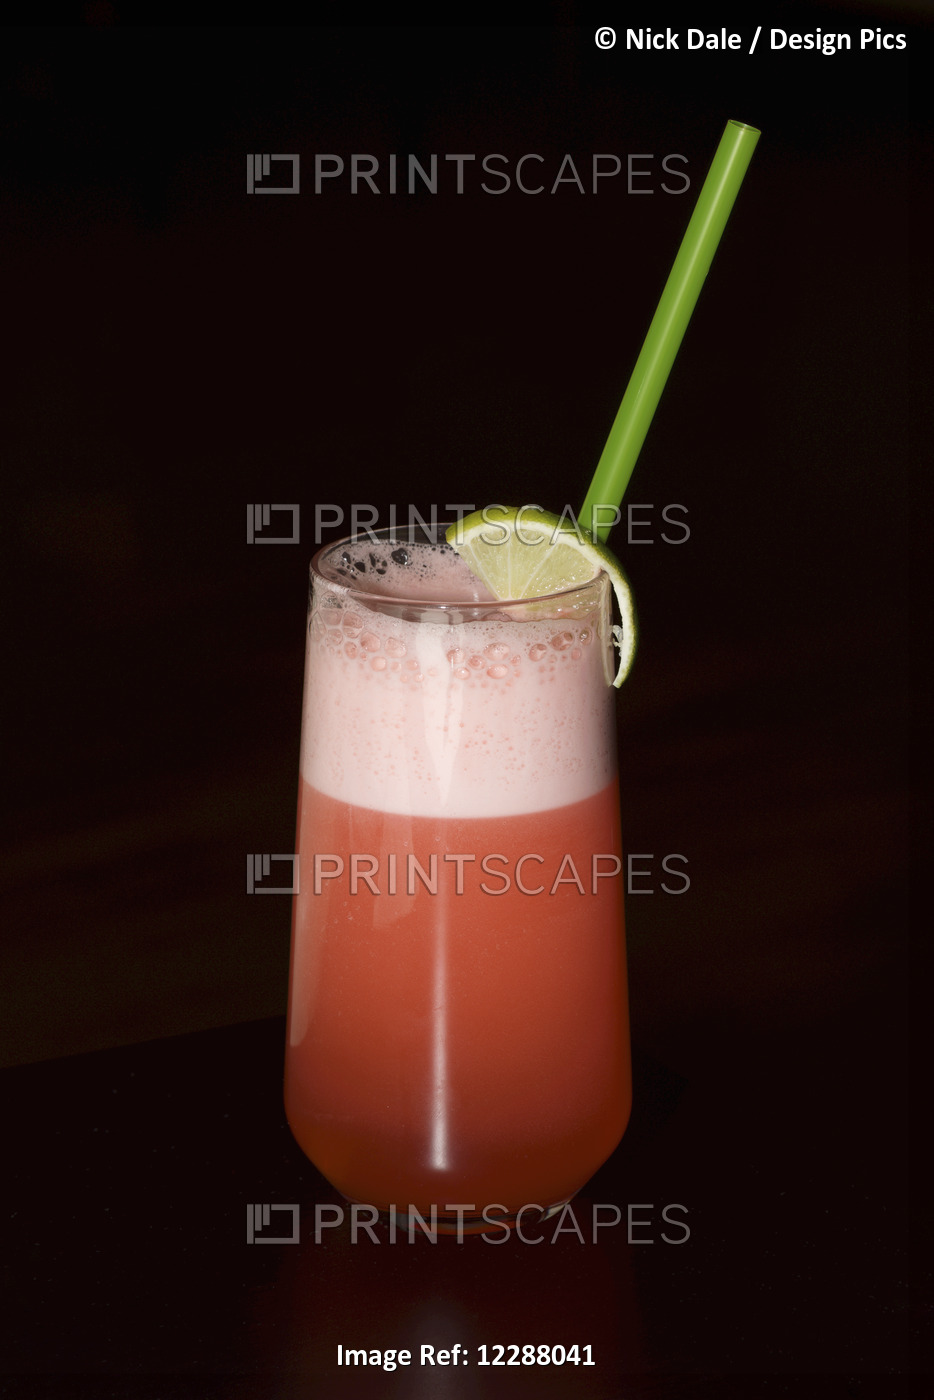 Glass Of Sherbet With Lime And Straw On A Black Background; Ankara, Turkey